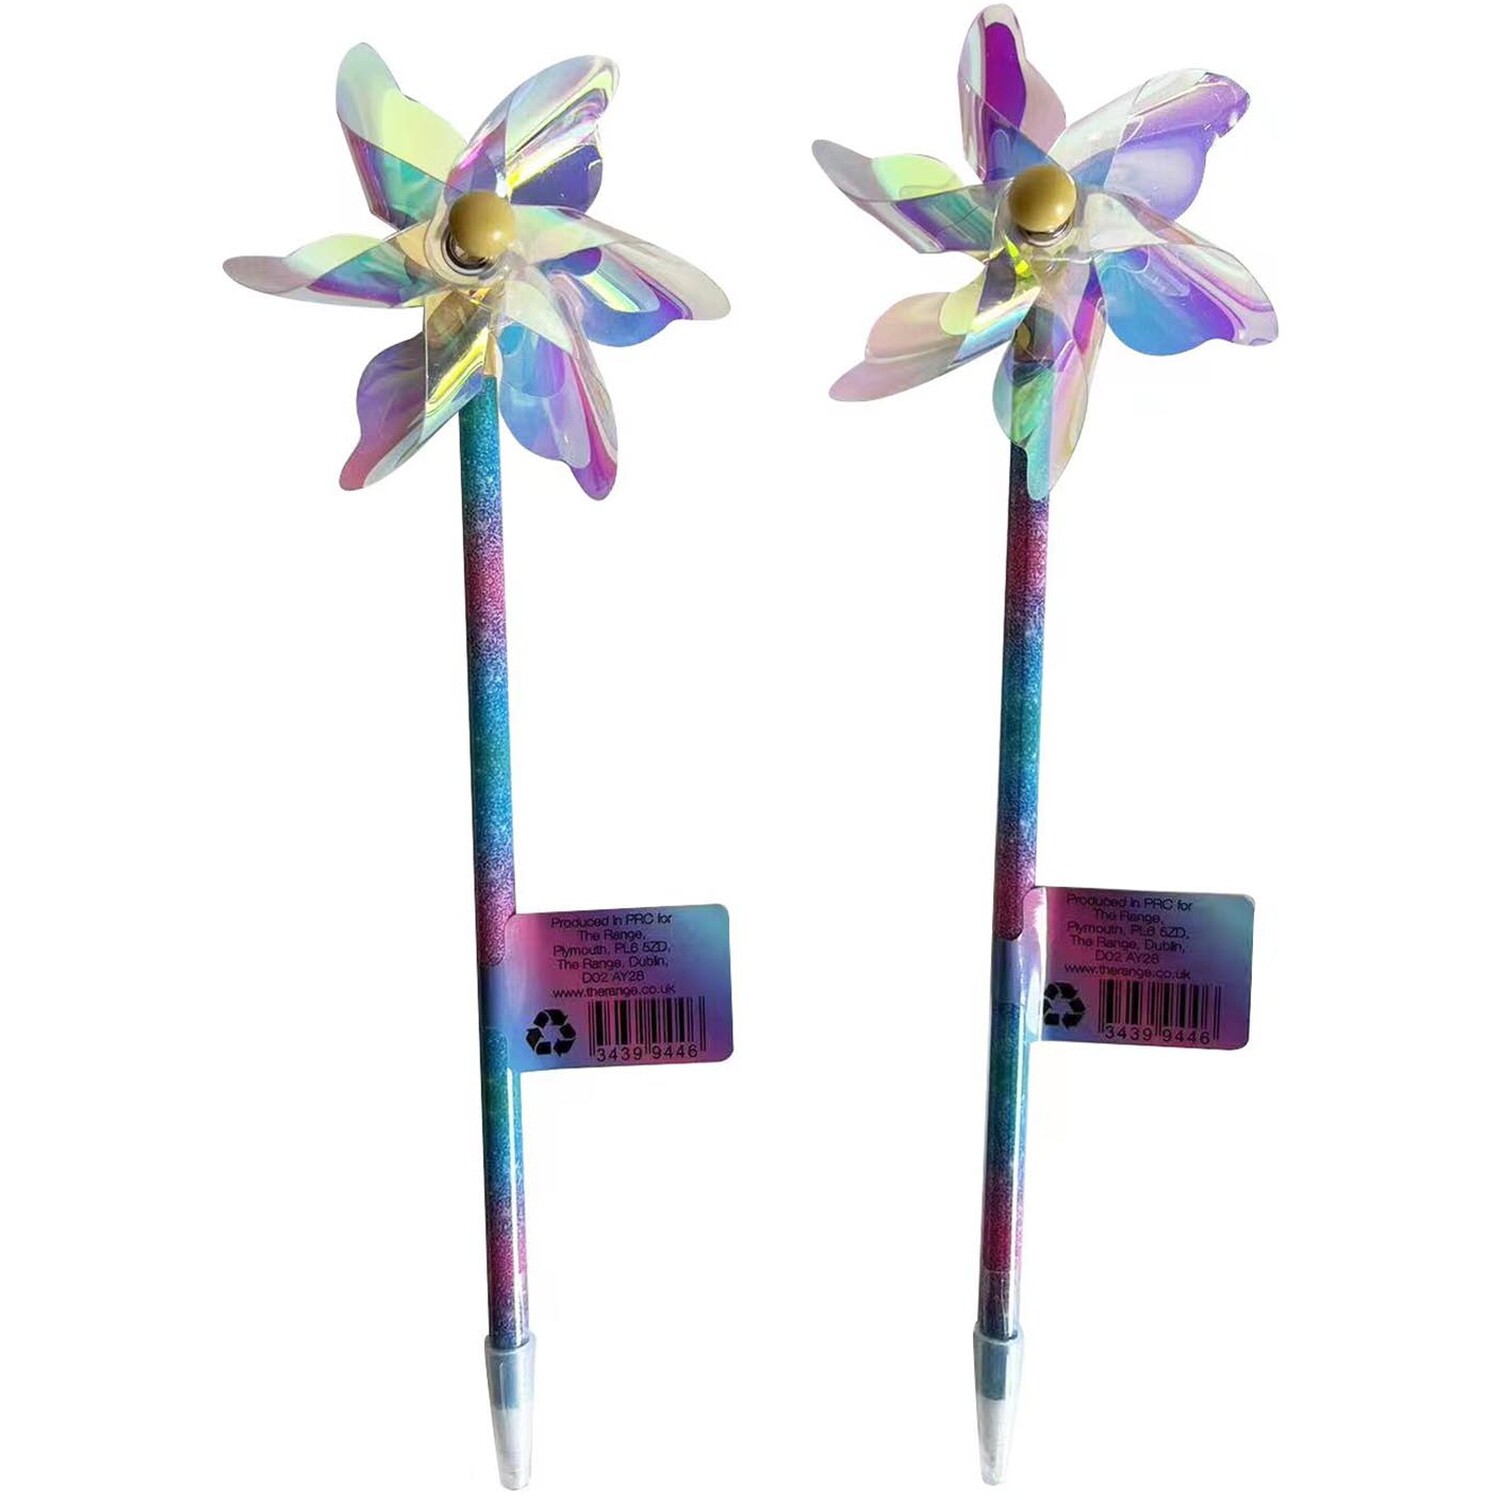 Holographic Windmill Pen Image